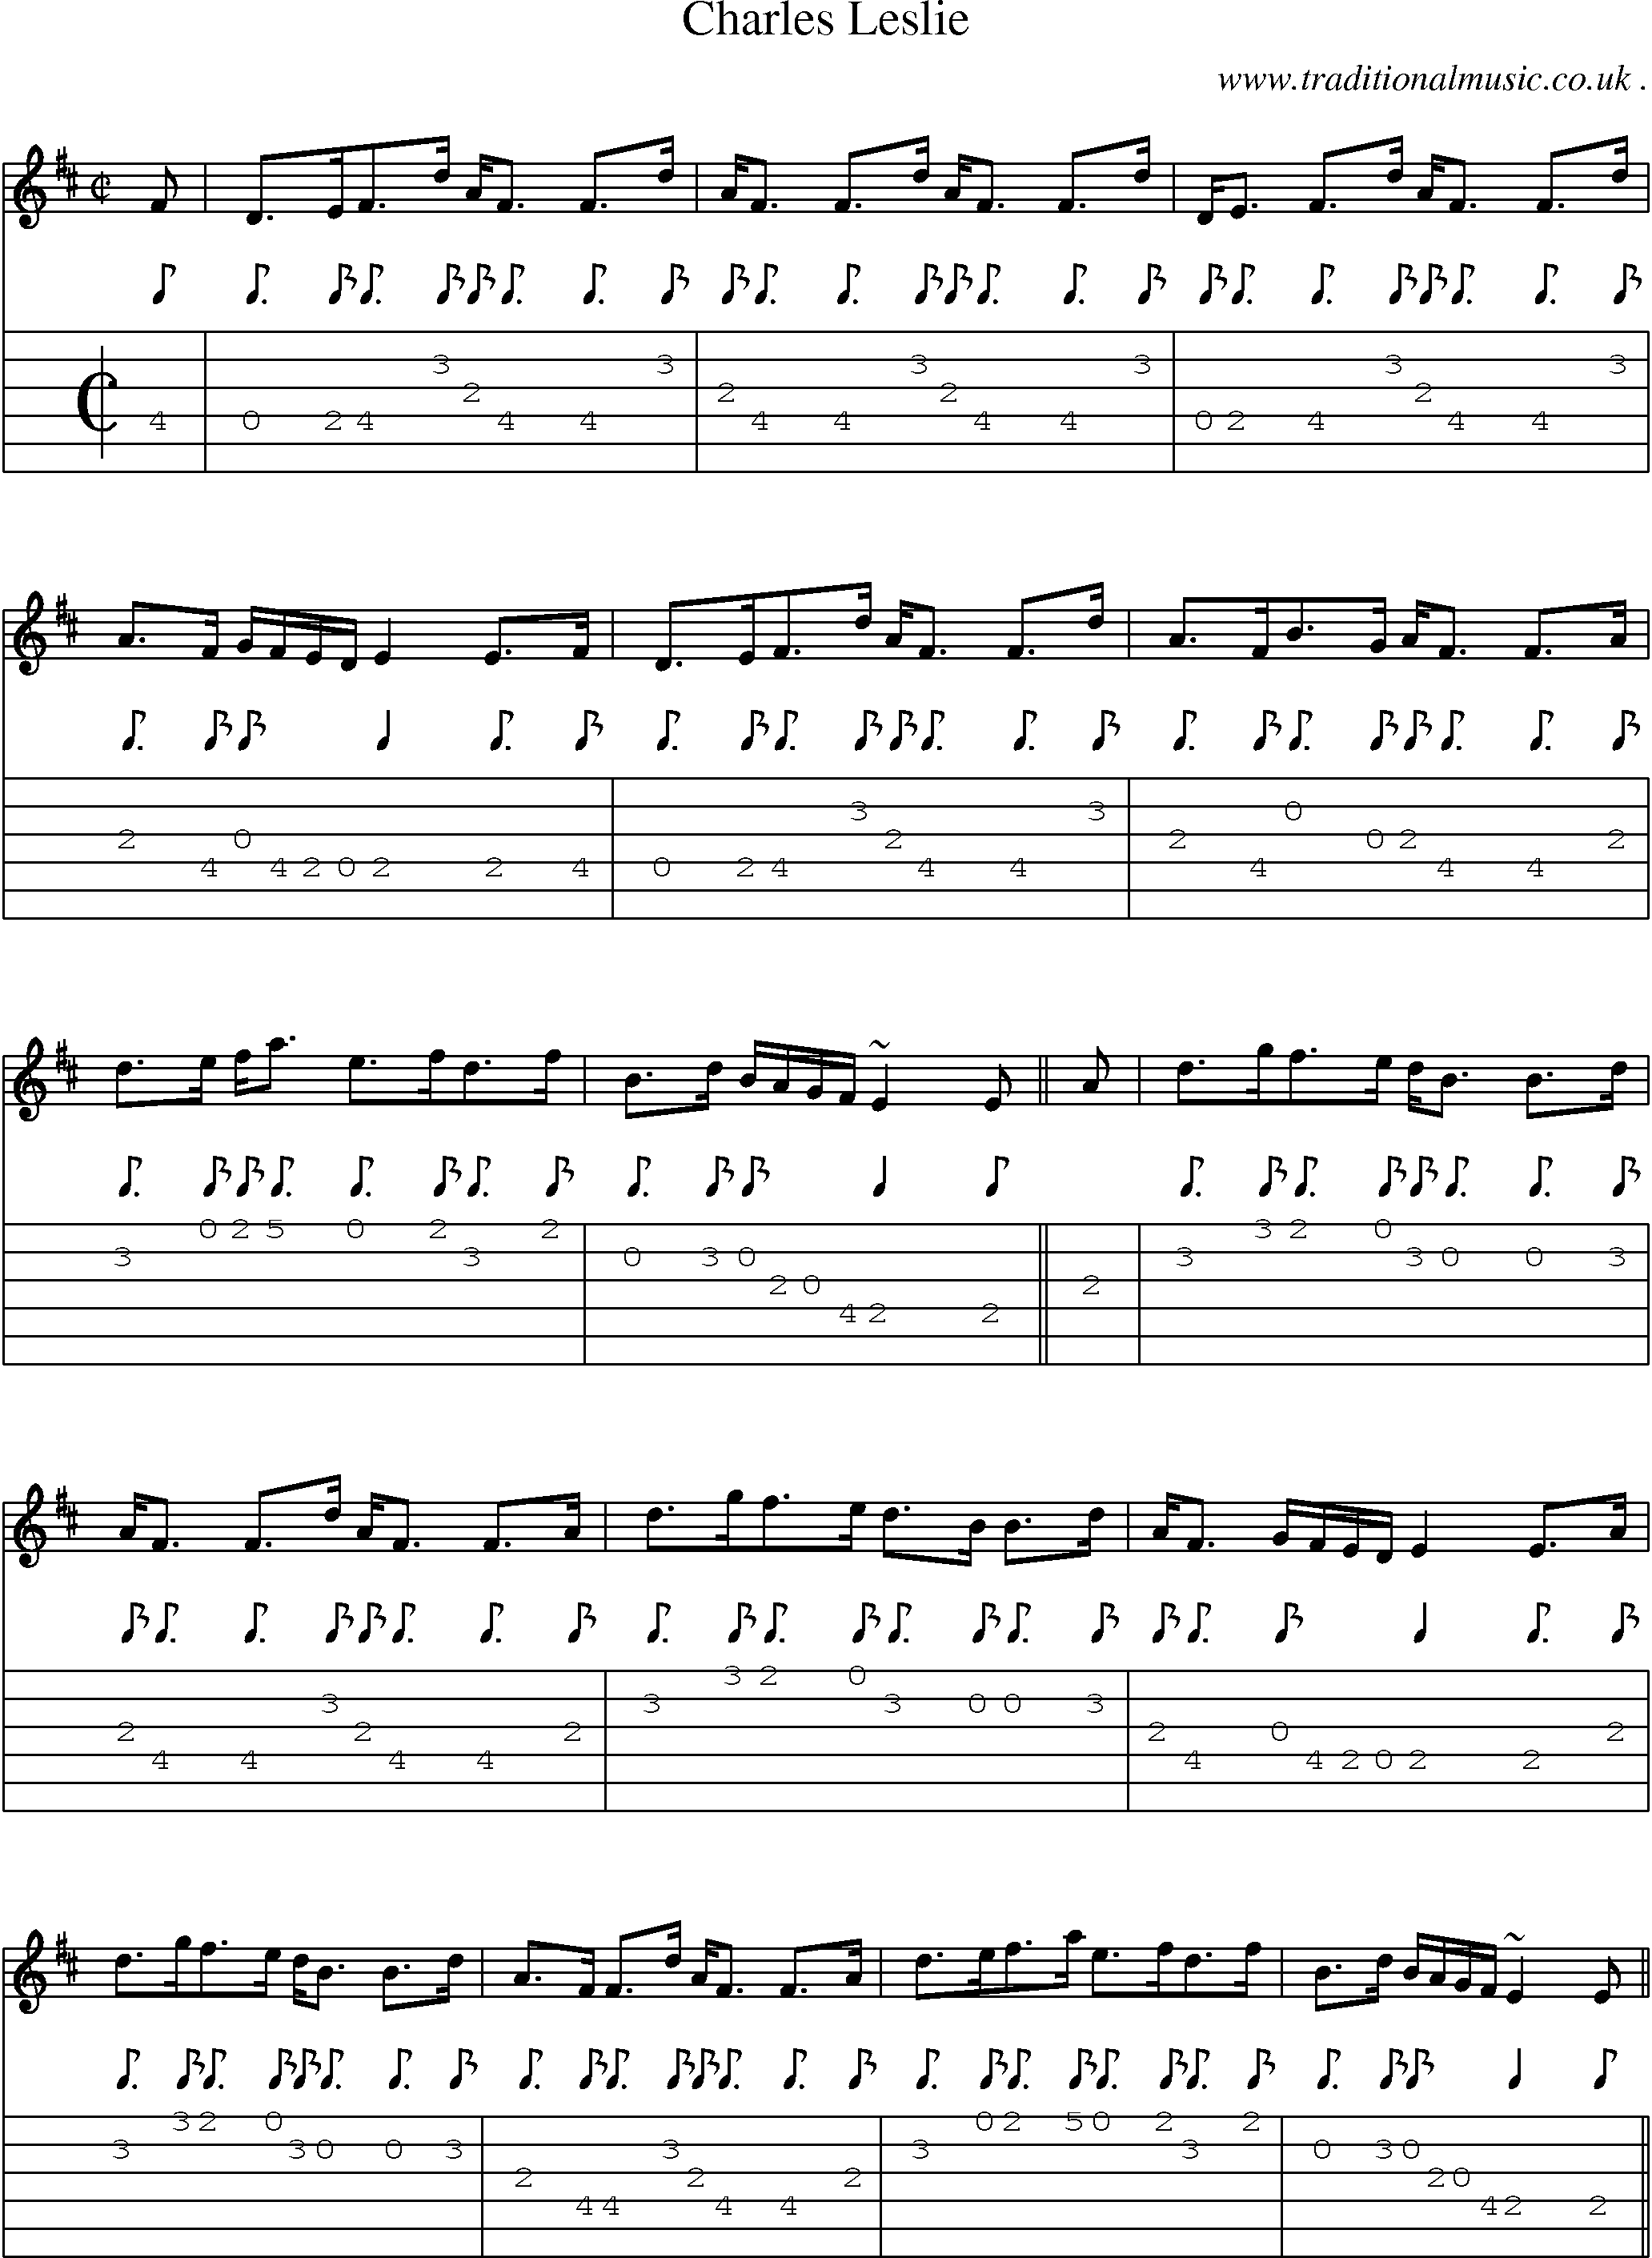 Sheet-music  score, Chords and Guitar Tabs for Charles Leslie